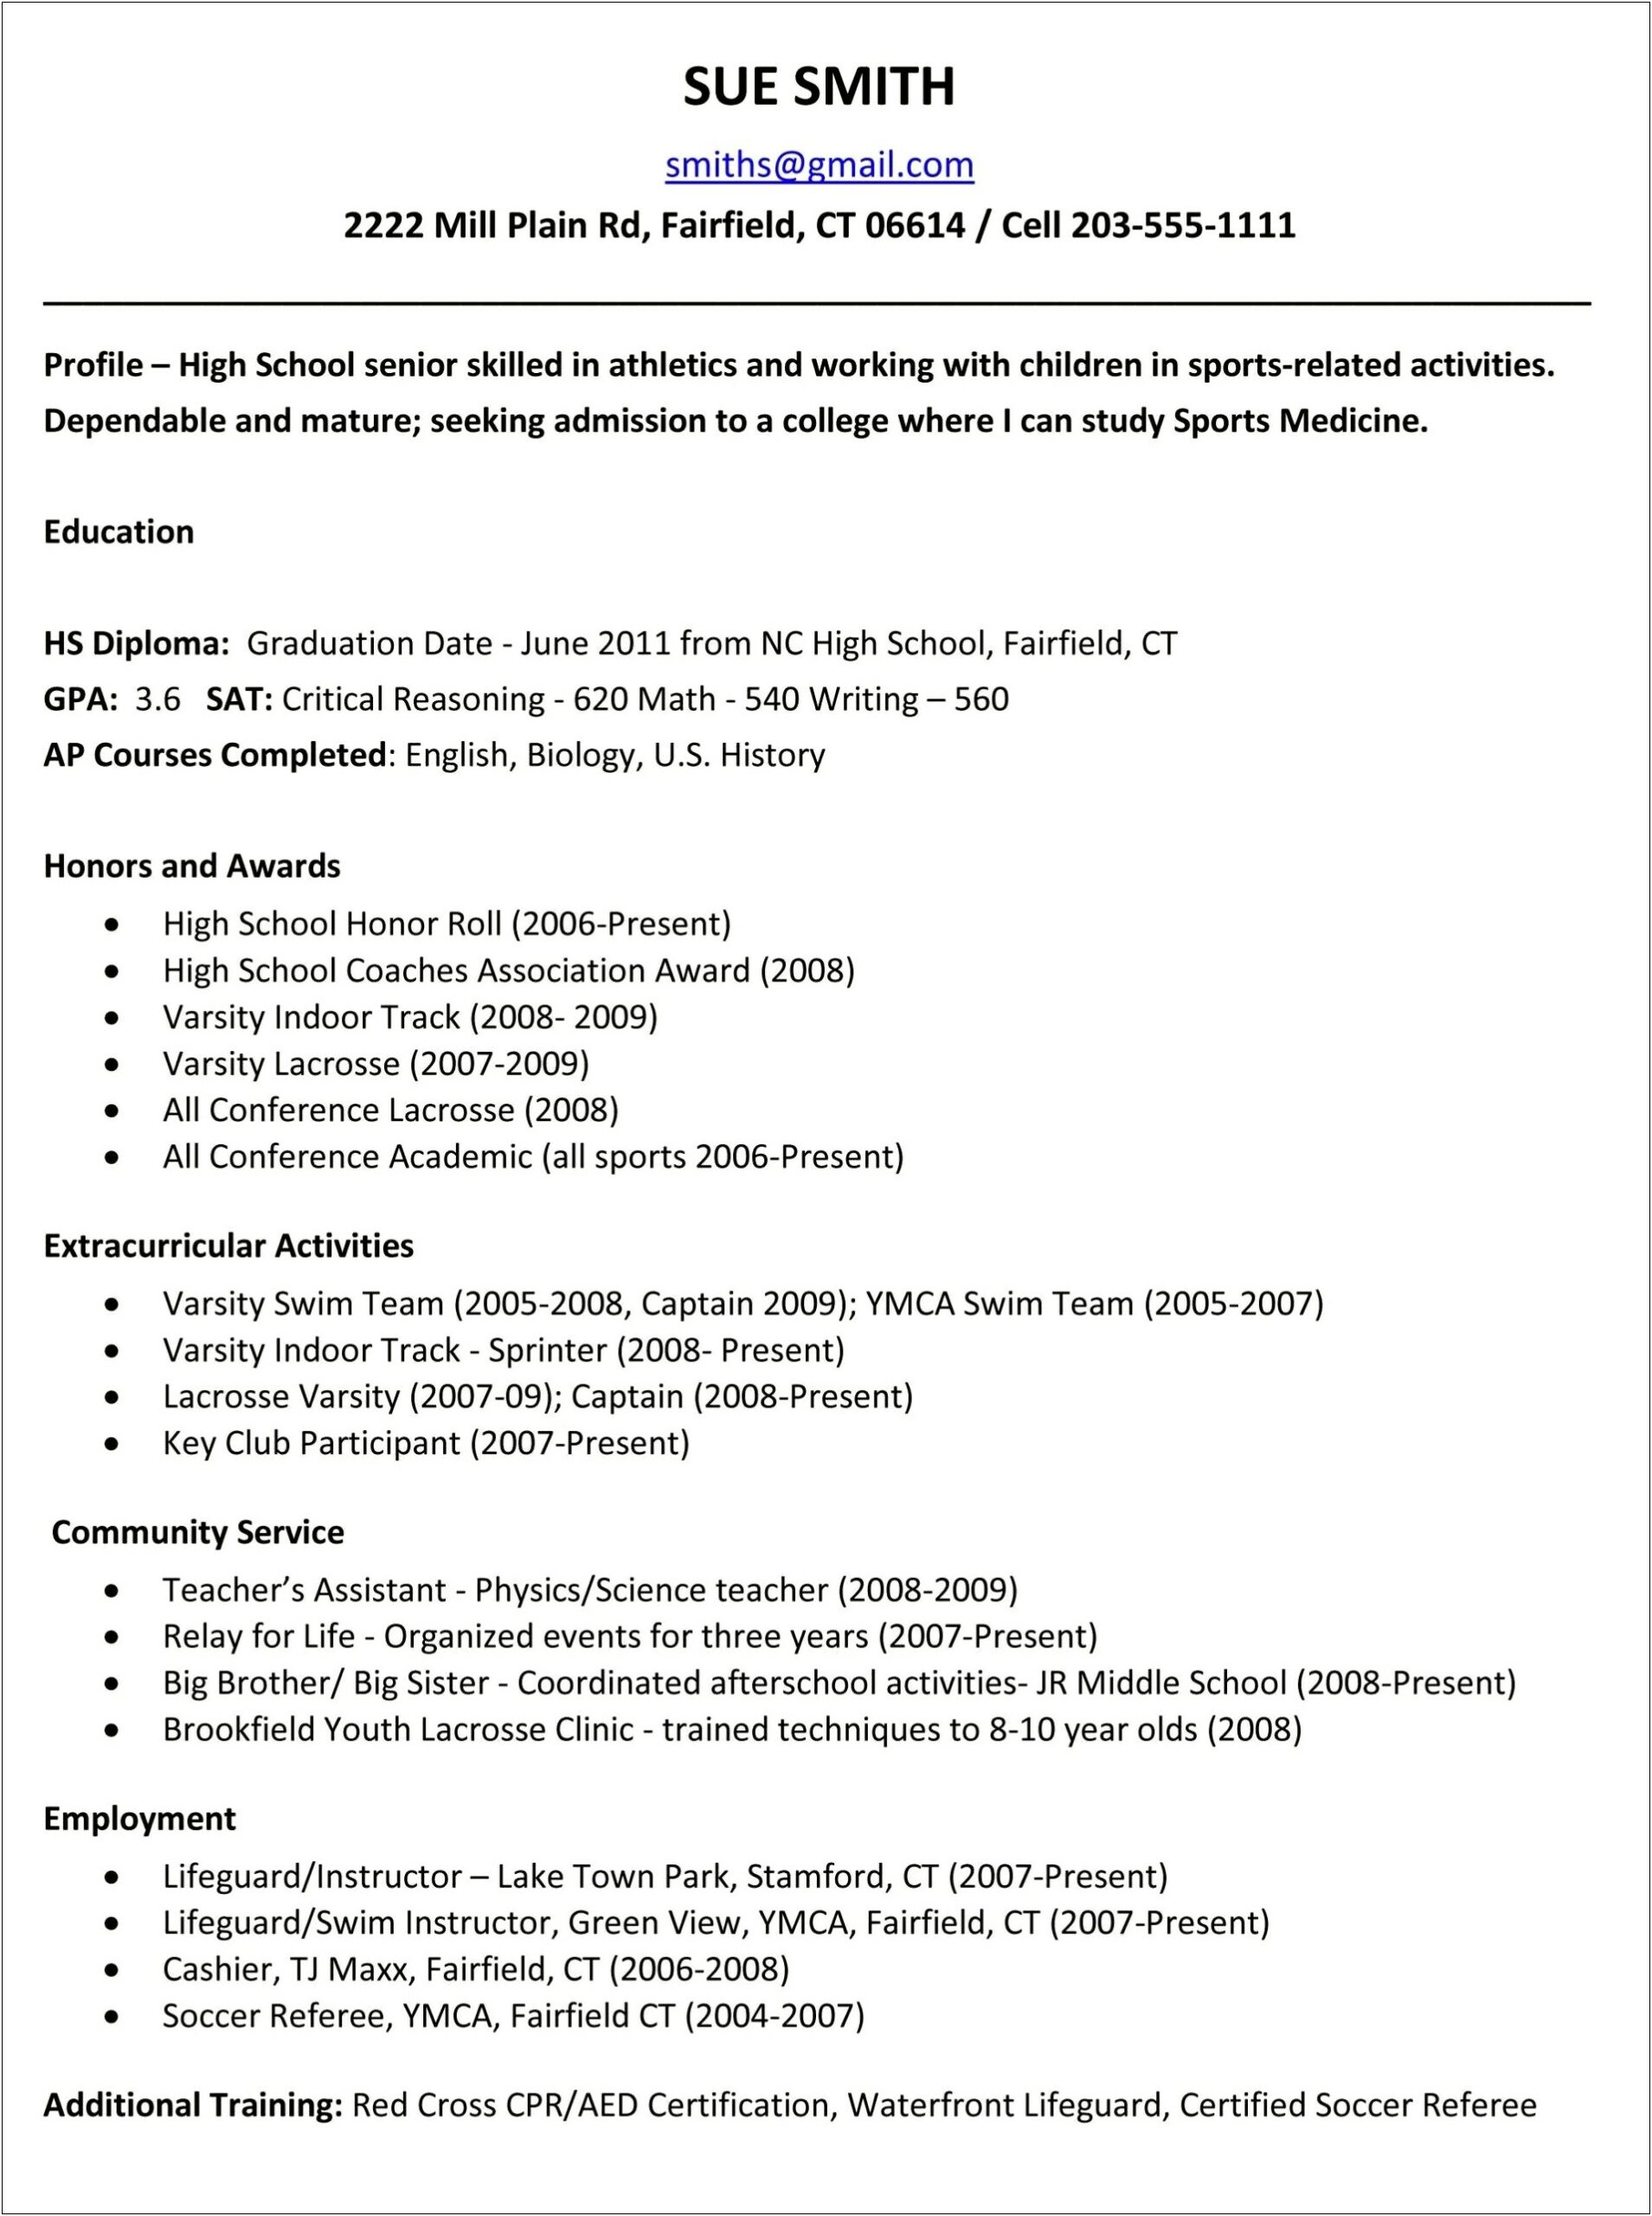 Extracurricular Resume Template For High School